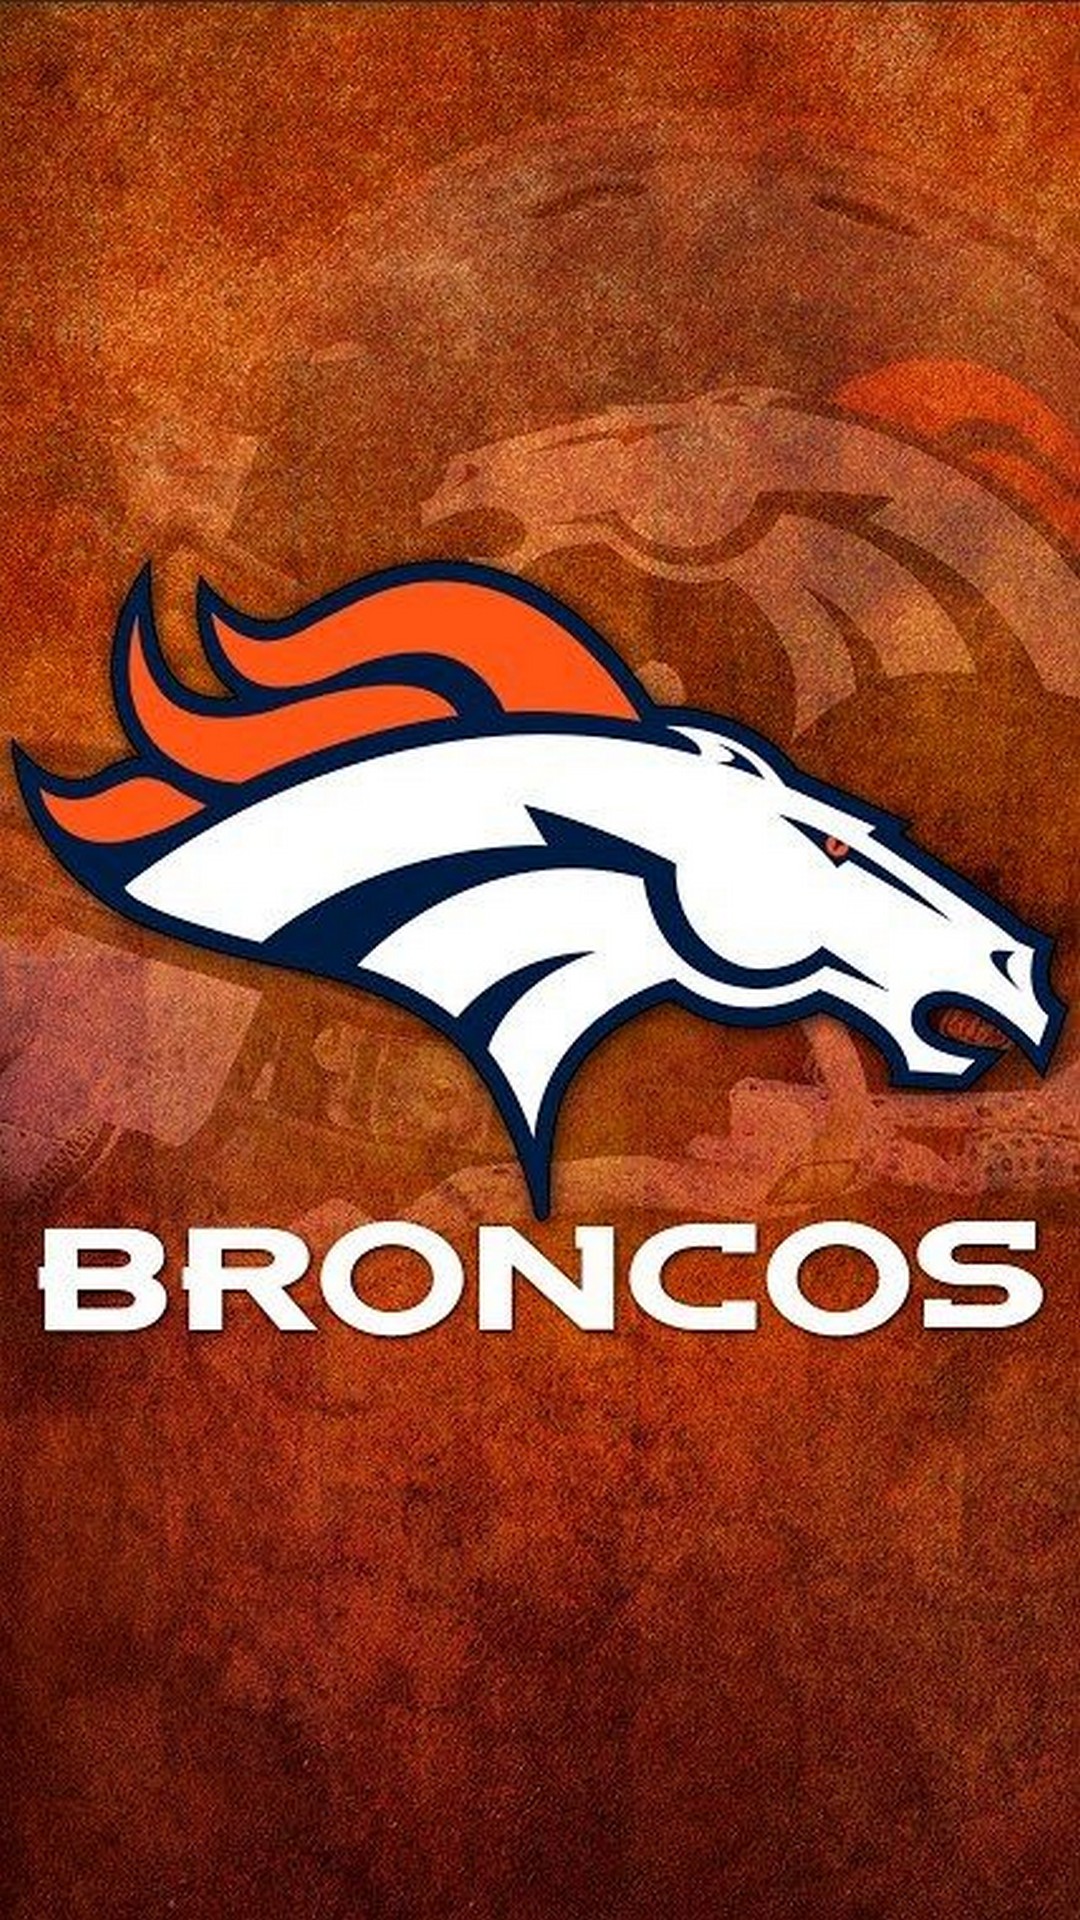 Denver Broncos iPhone Backgrounds With high-resolution 1080X1920 pixel. Download and set as wallpaper for Apple iPhone X, XS Max, XR, 8, 7, 6, SE, iPad, Android